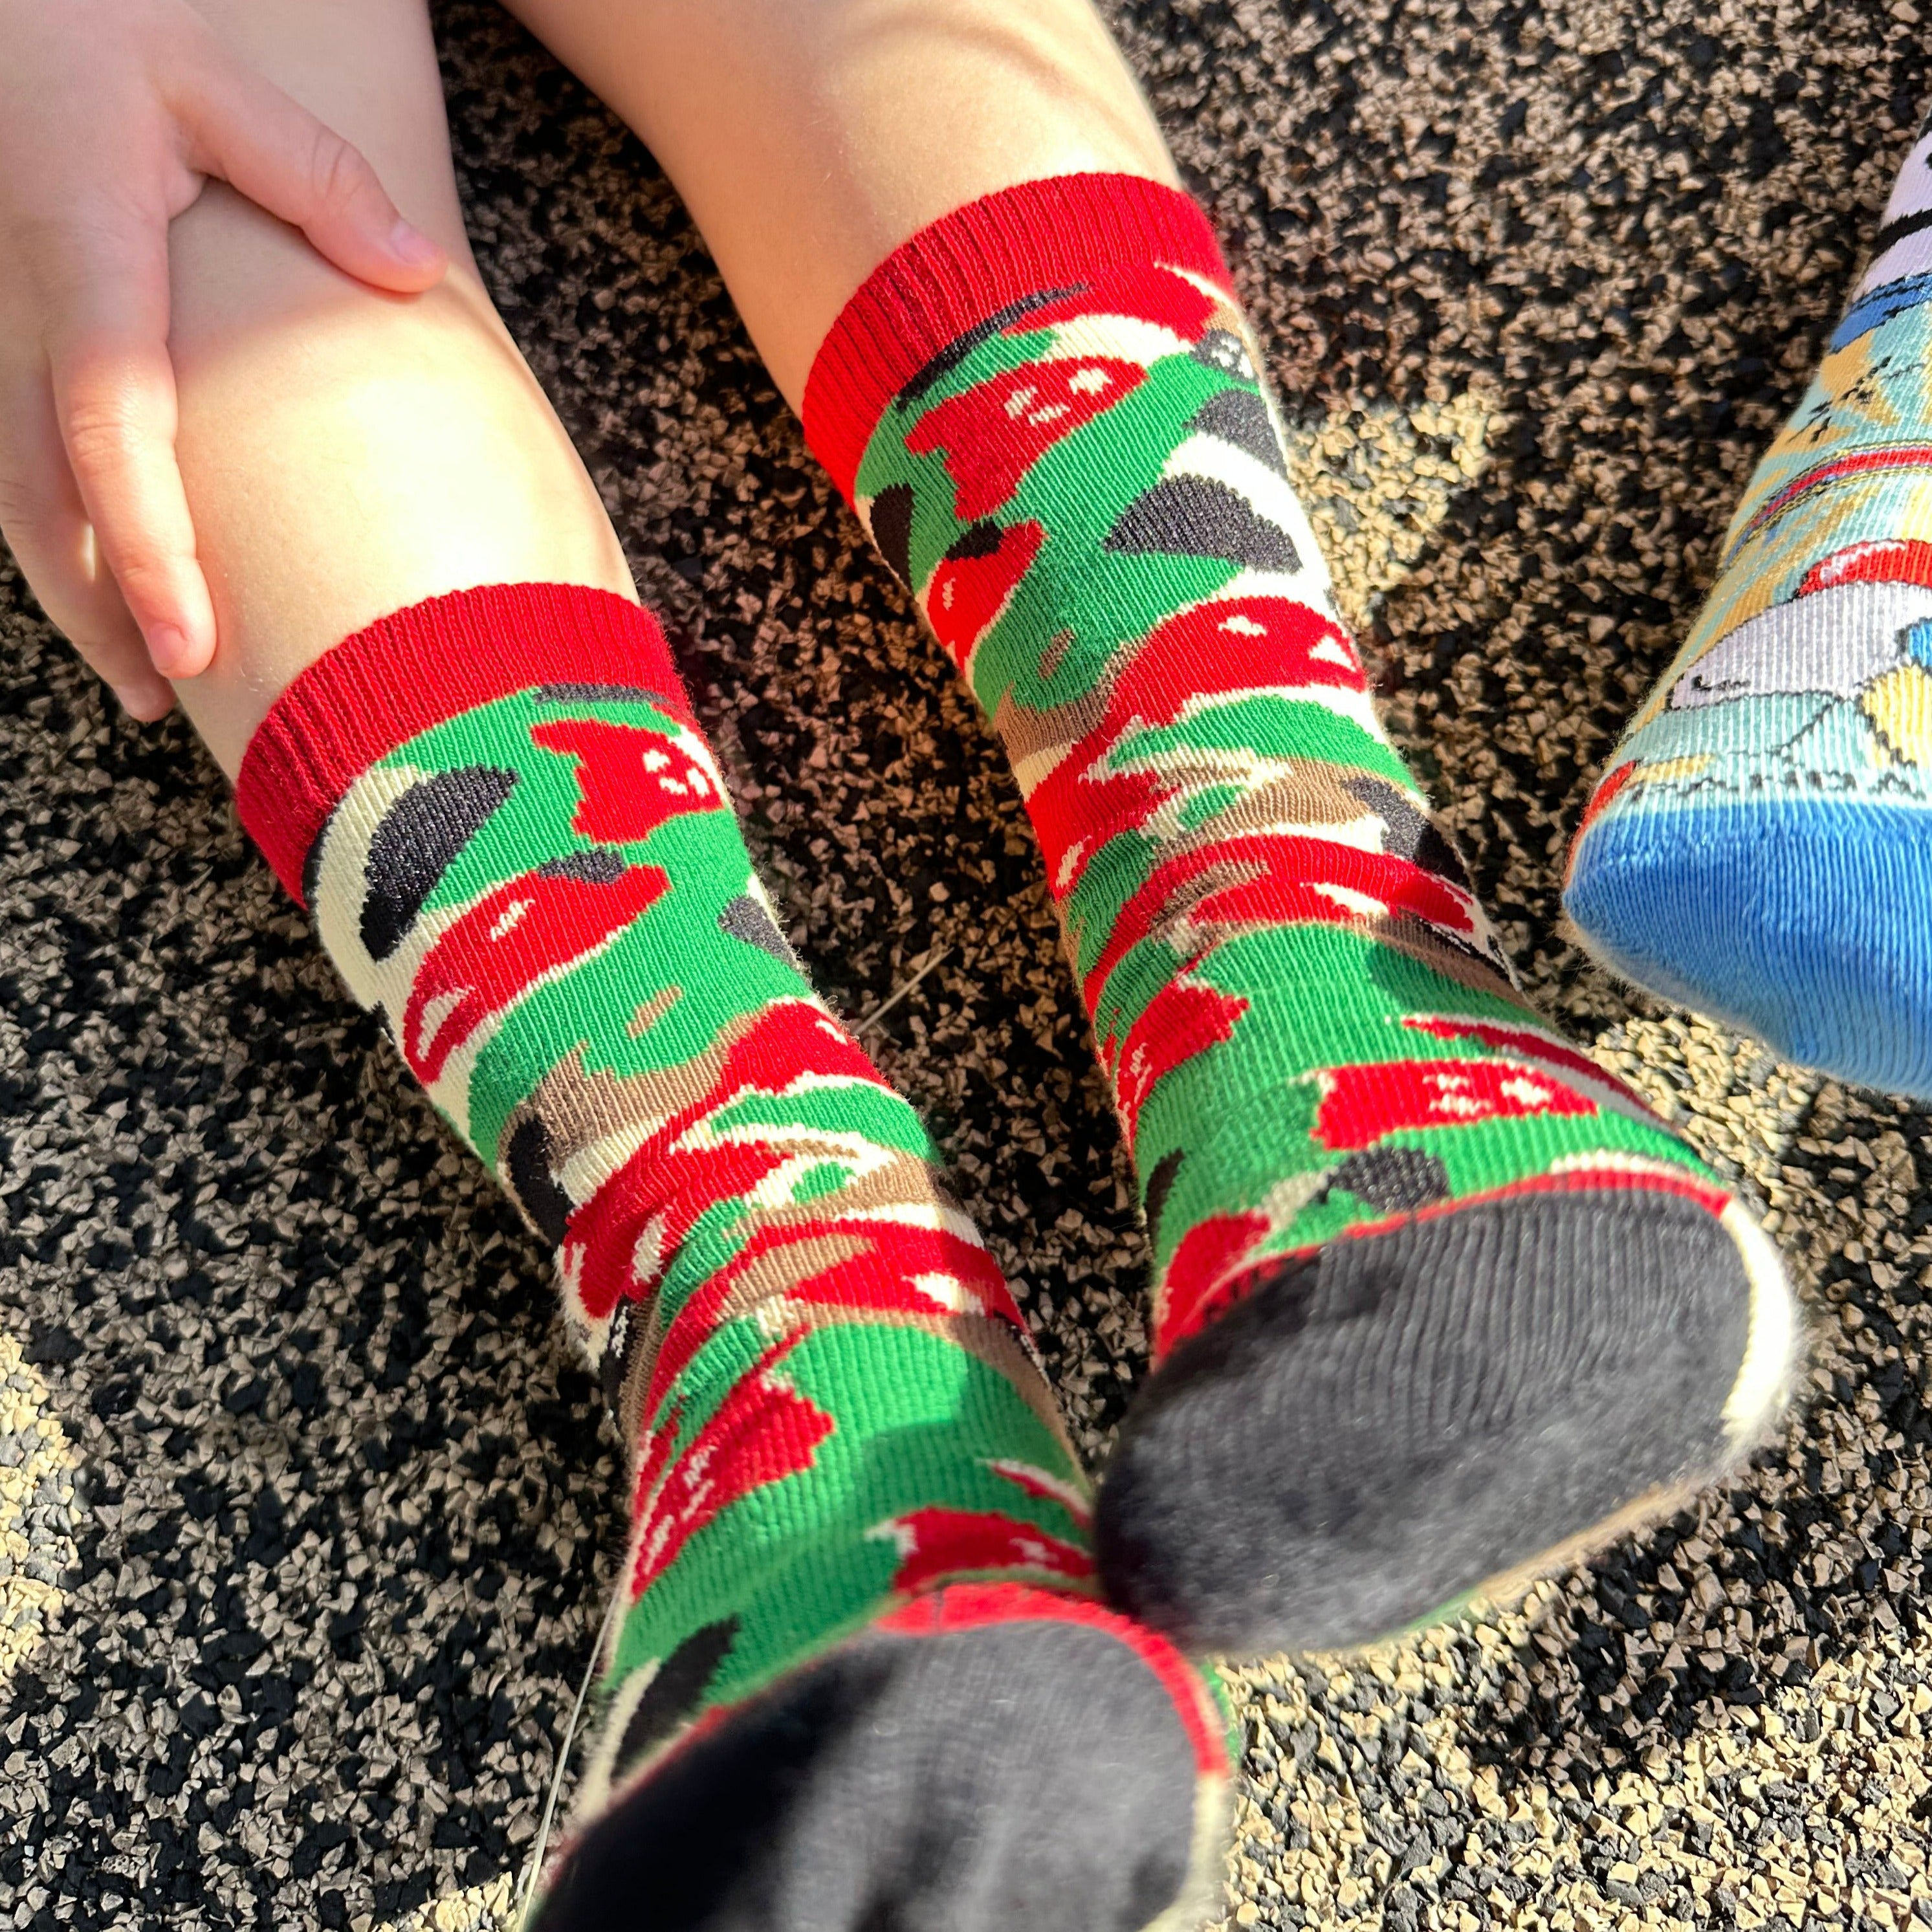 Camouflage Panda Socks from the Sock Panda (Ages 3-7)